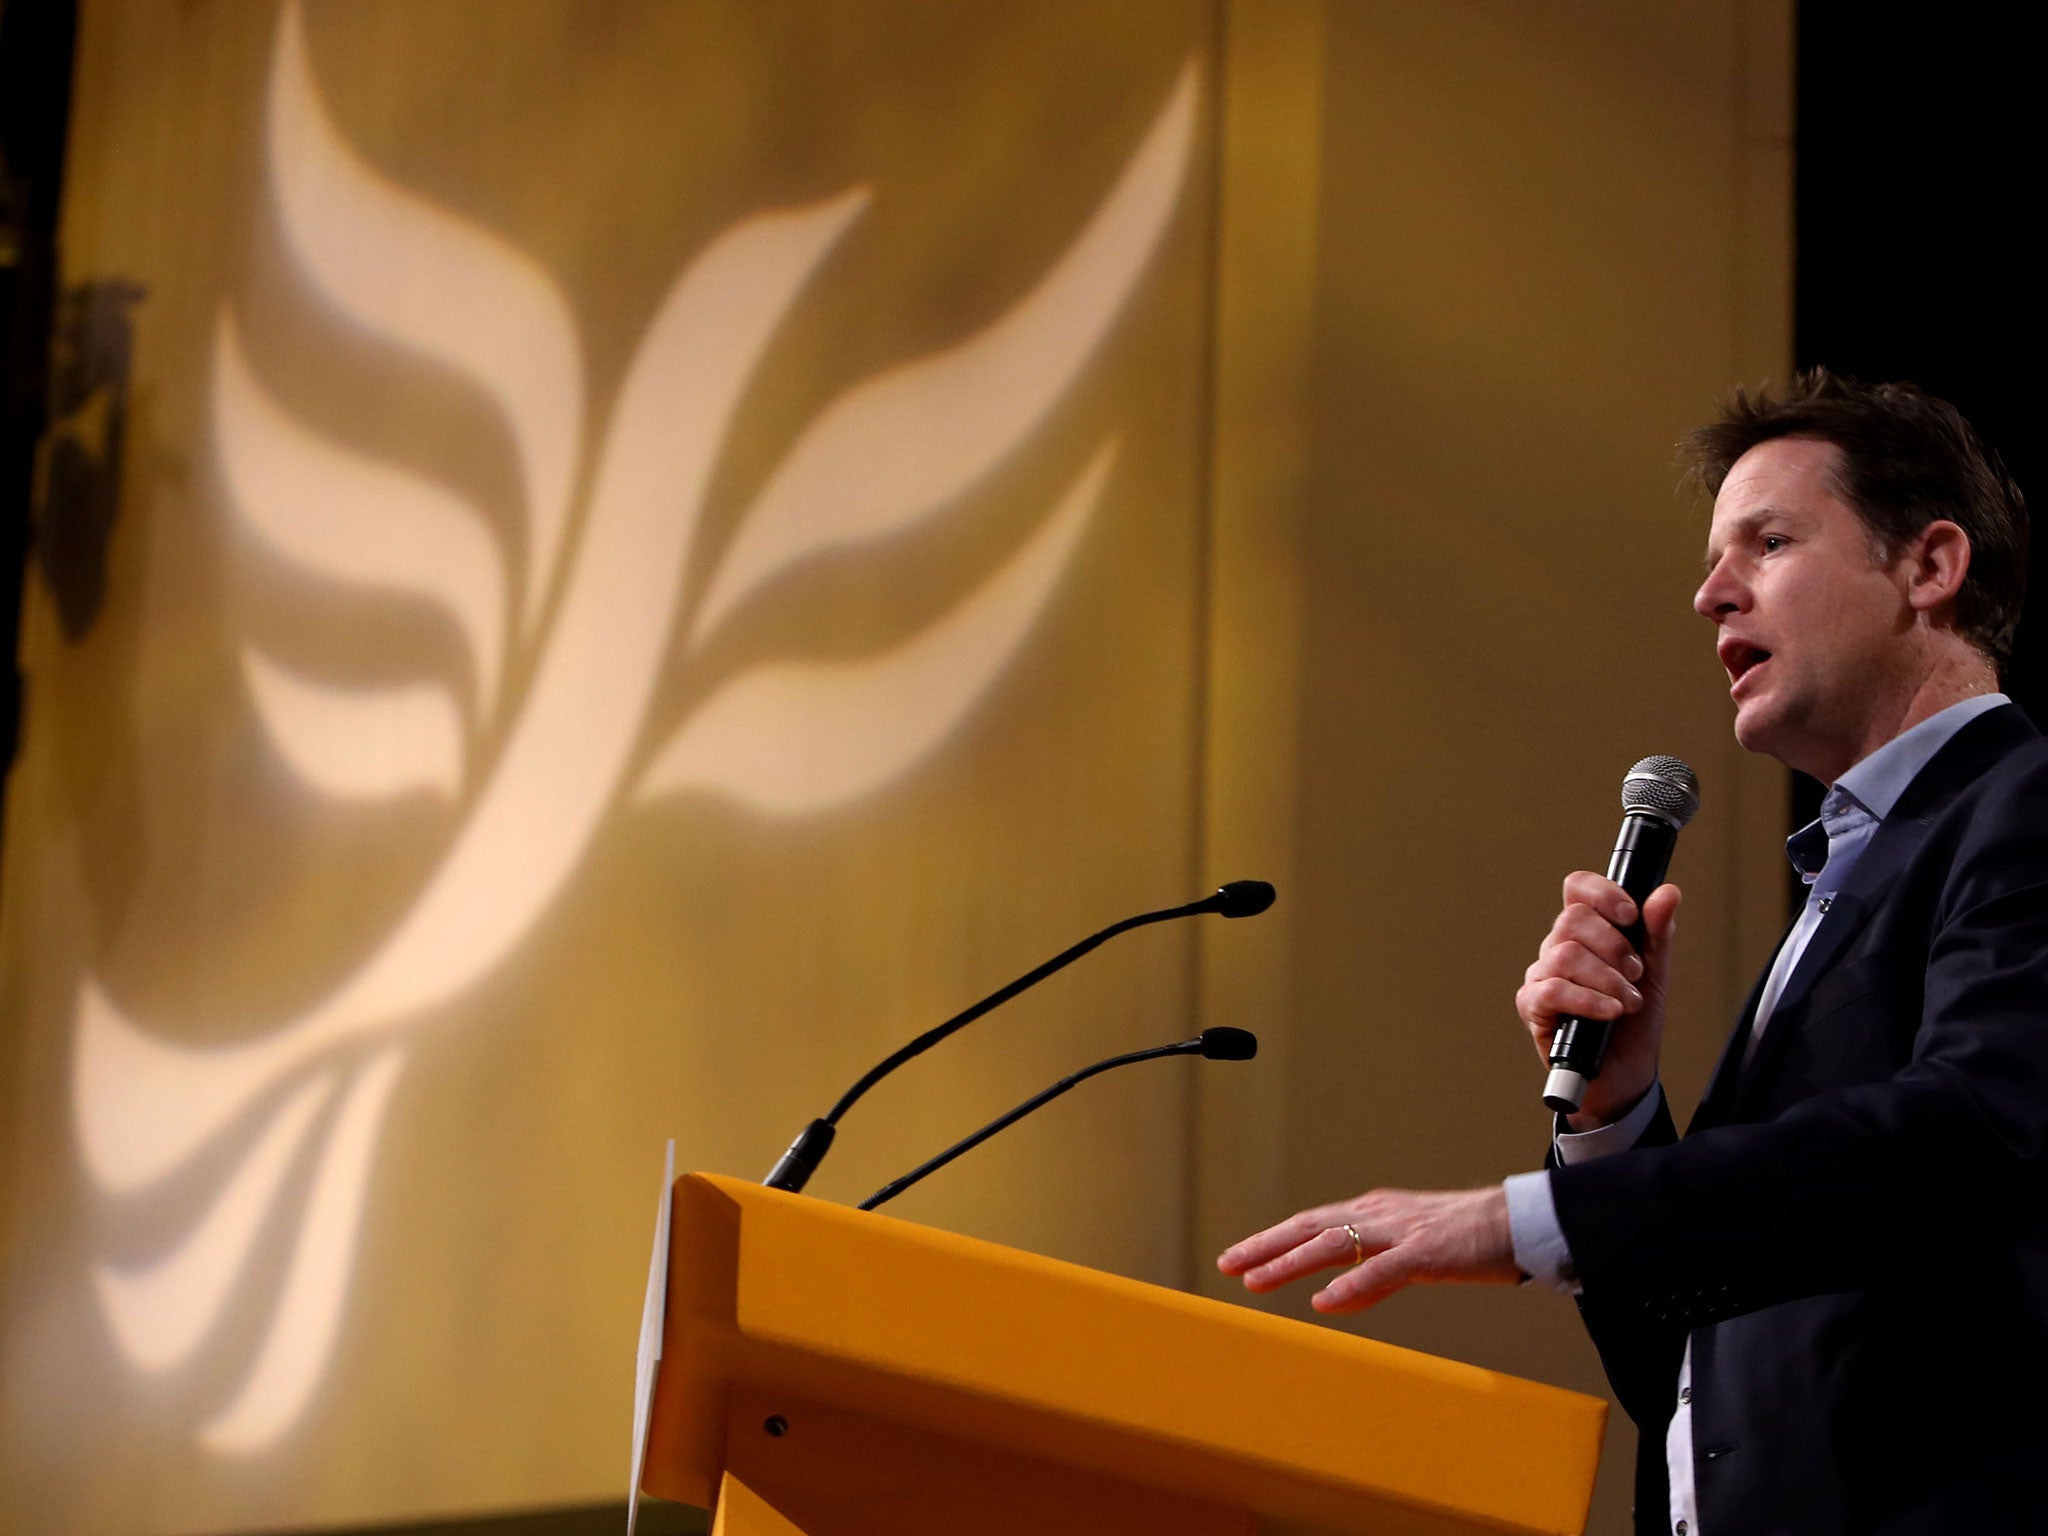 In his keynote speech to the party's spring conference in Liverpool, Mr Clegg said: "So let me be clear: just like we would not put UKIP in charge of Europe, we are not going to put the SNP in charge of Britain - country they want to rip apart. It's just